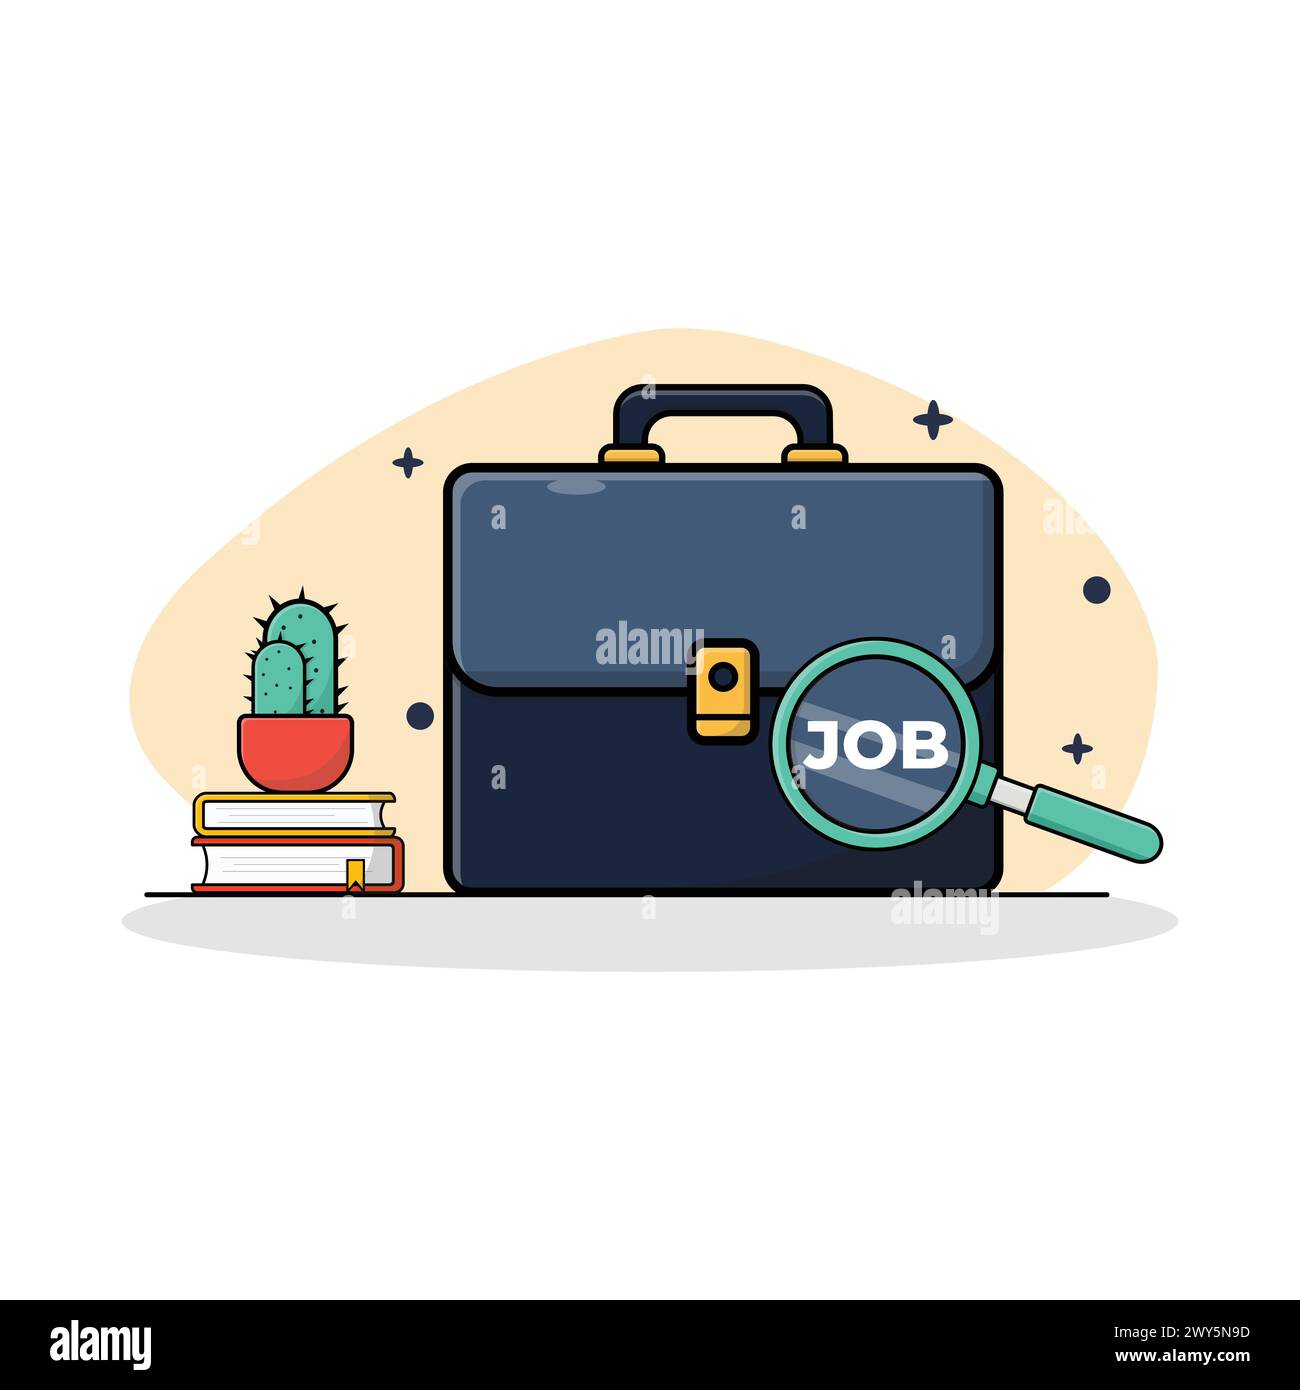 Search for Job Concept Vector Illustration Stock Vector